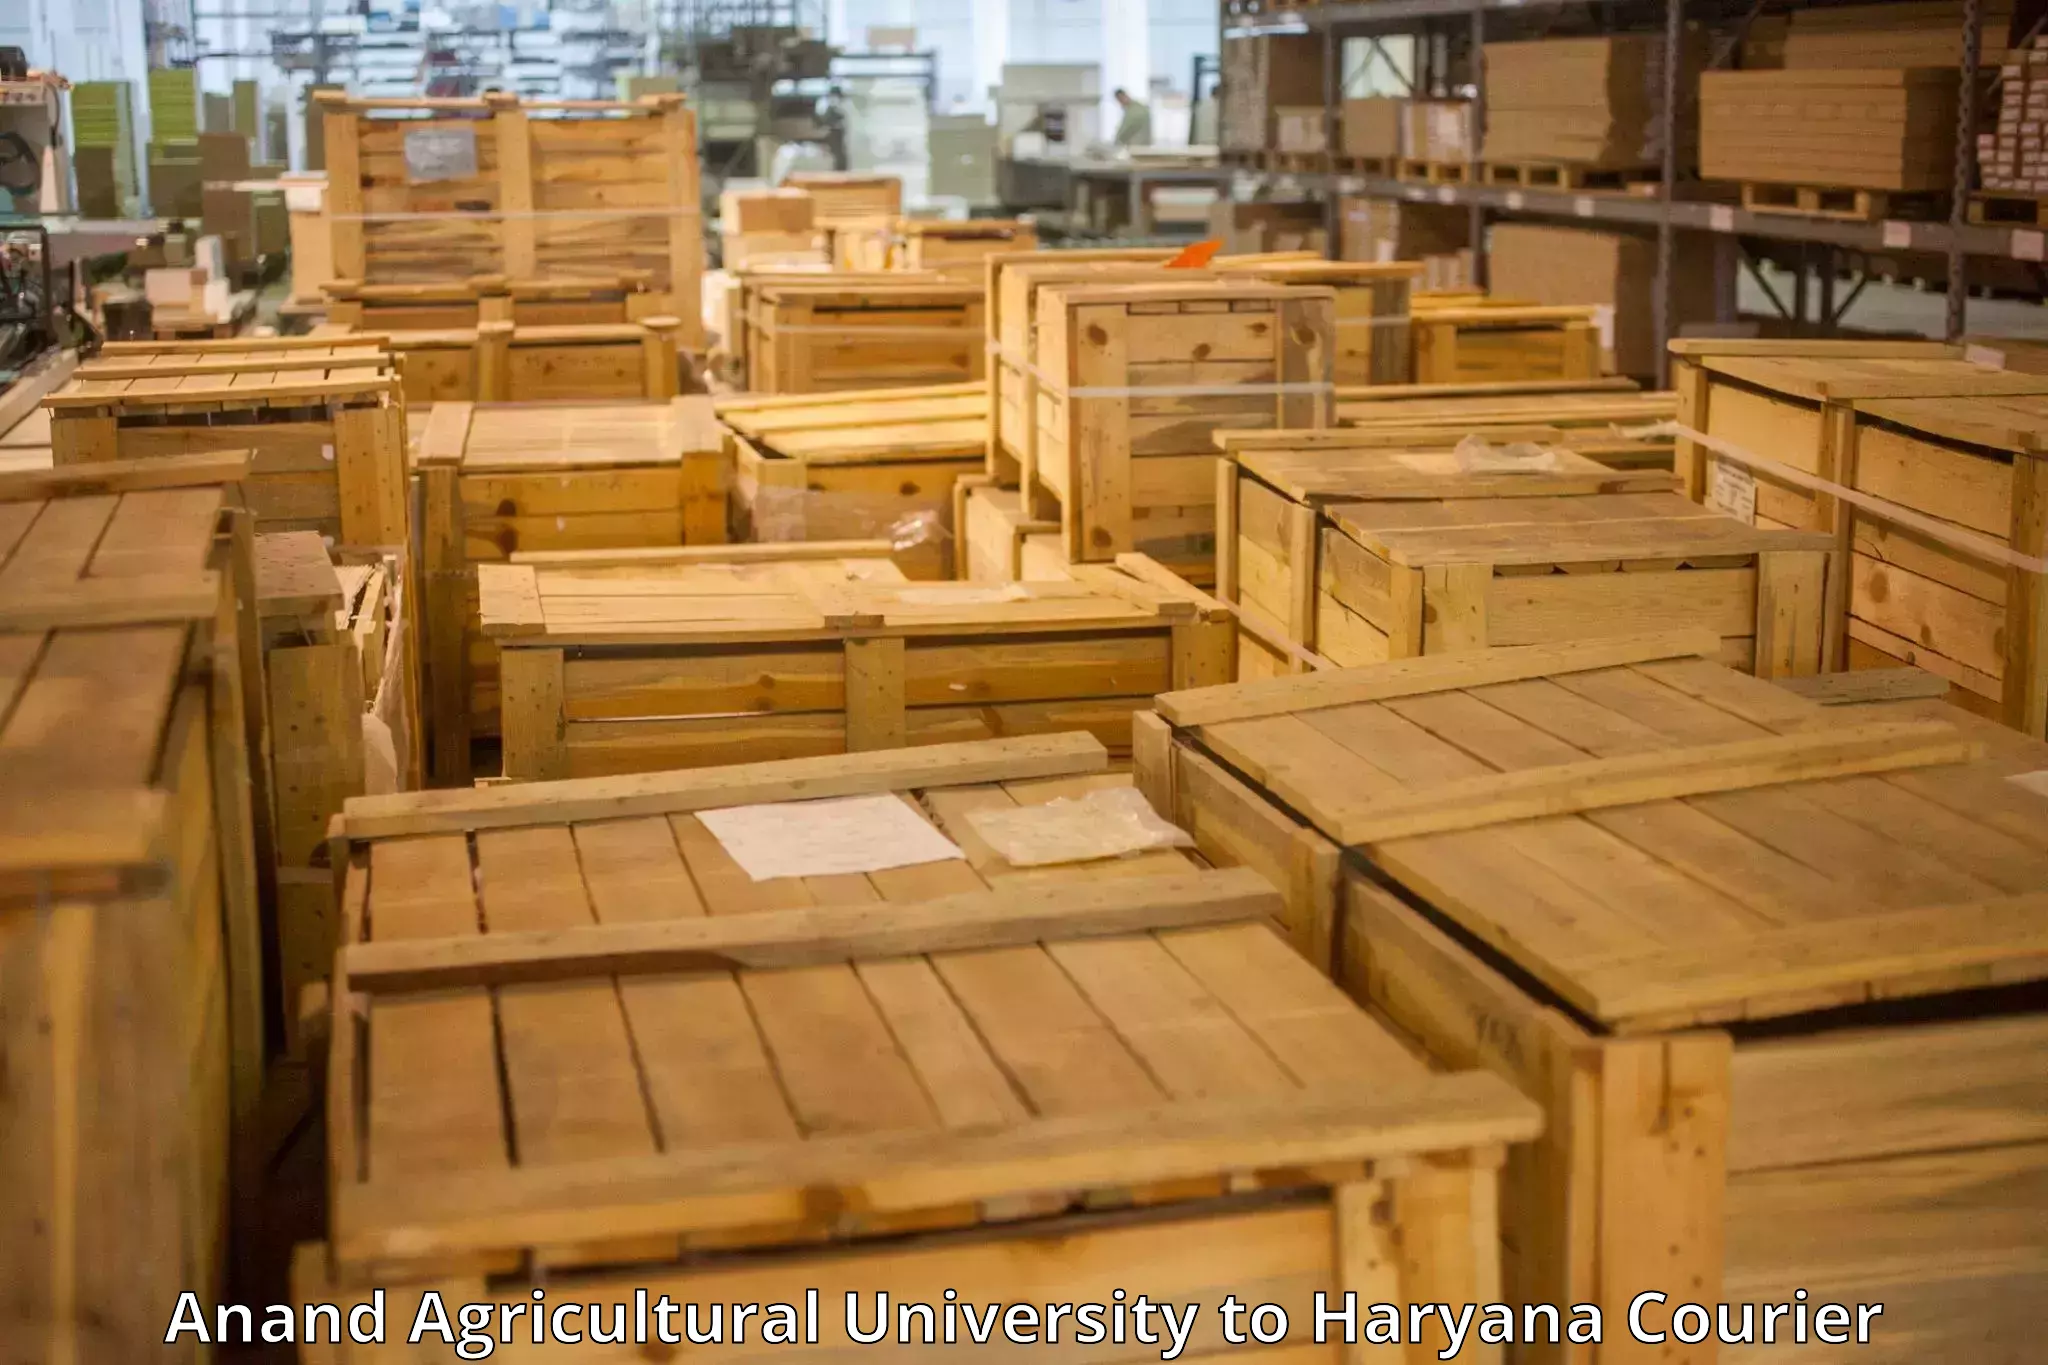 Online luggage shipping booking Anand Agricultural University to Gurgaon